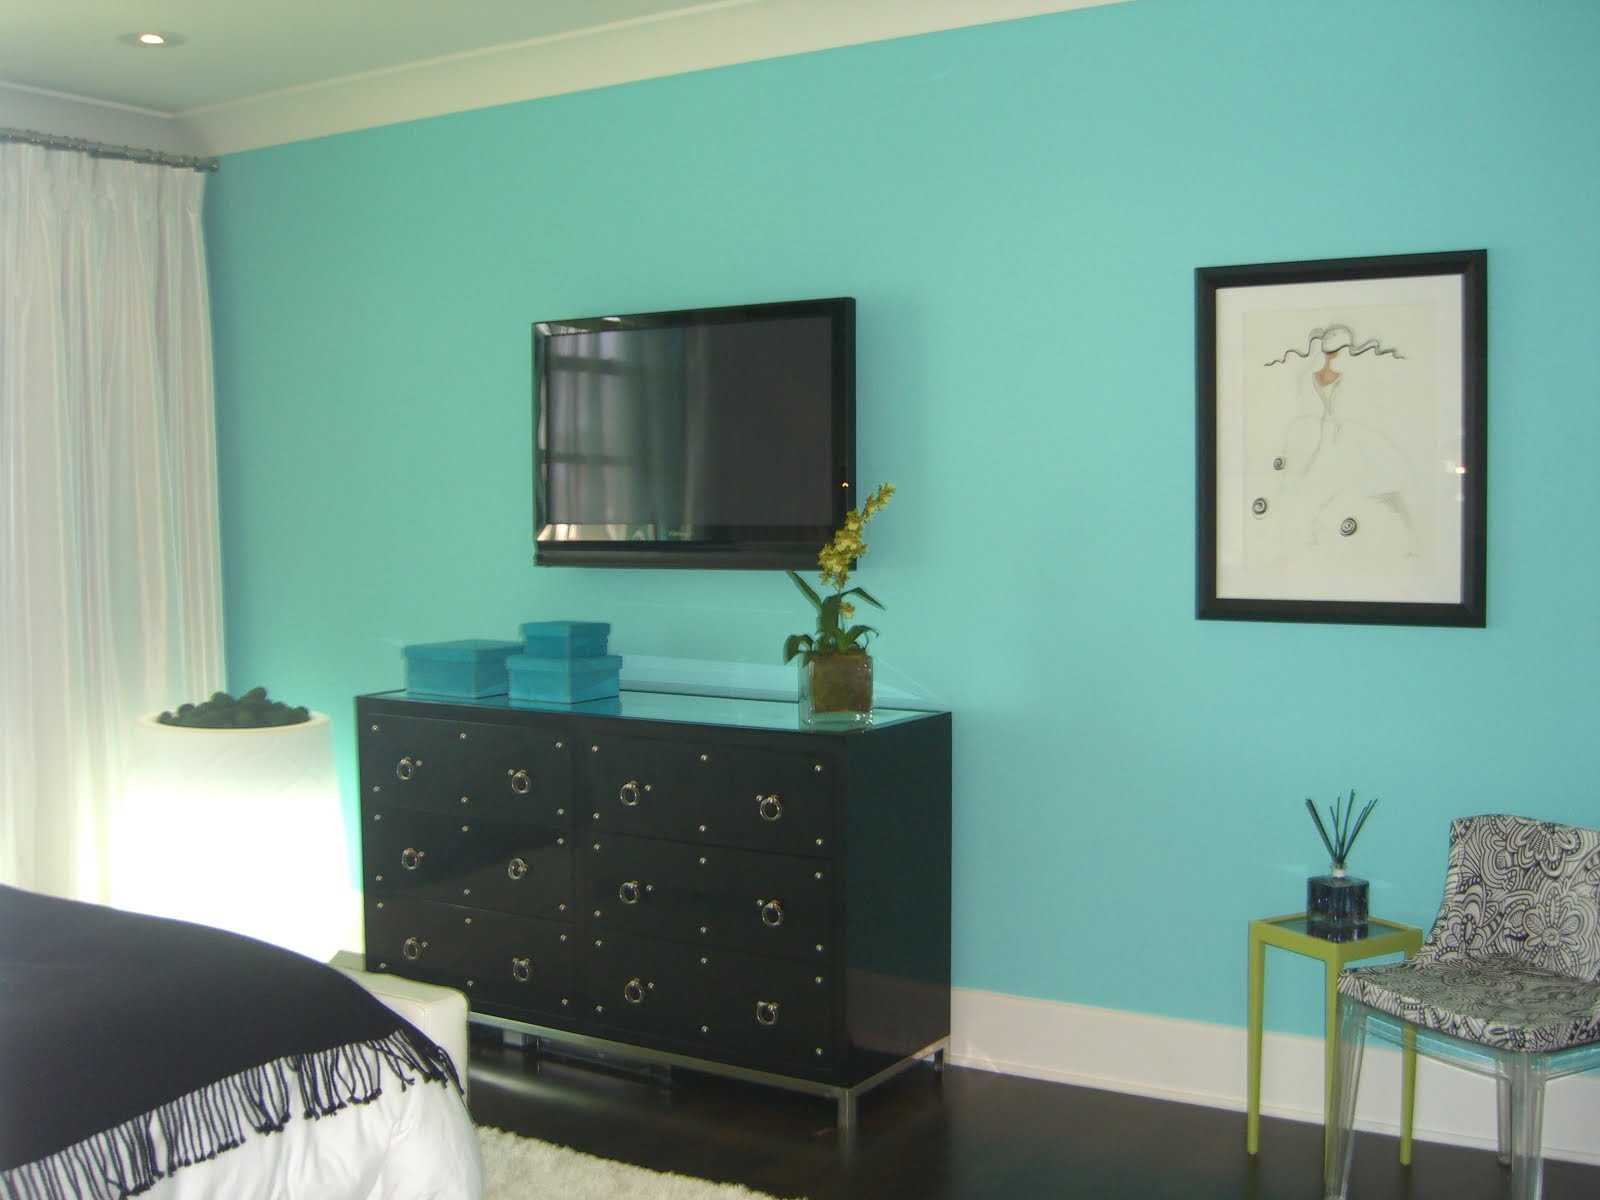 Turquoise Bedroom Walls
 MM Interior Design TURQUOISE COLOR OF THE YEAR